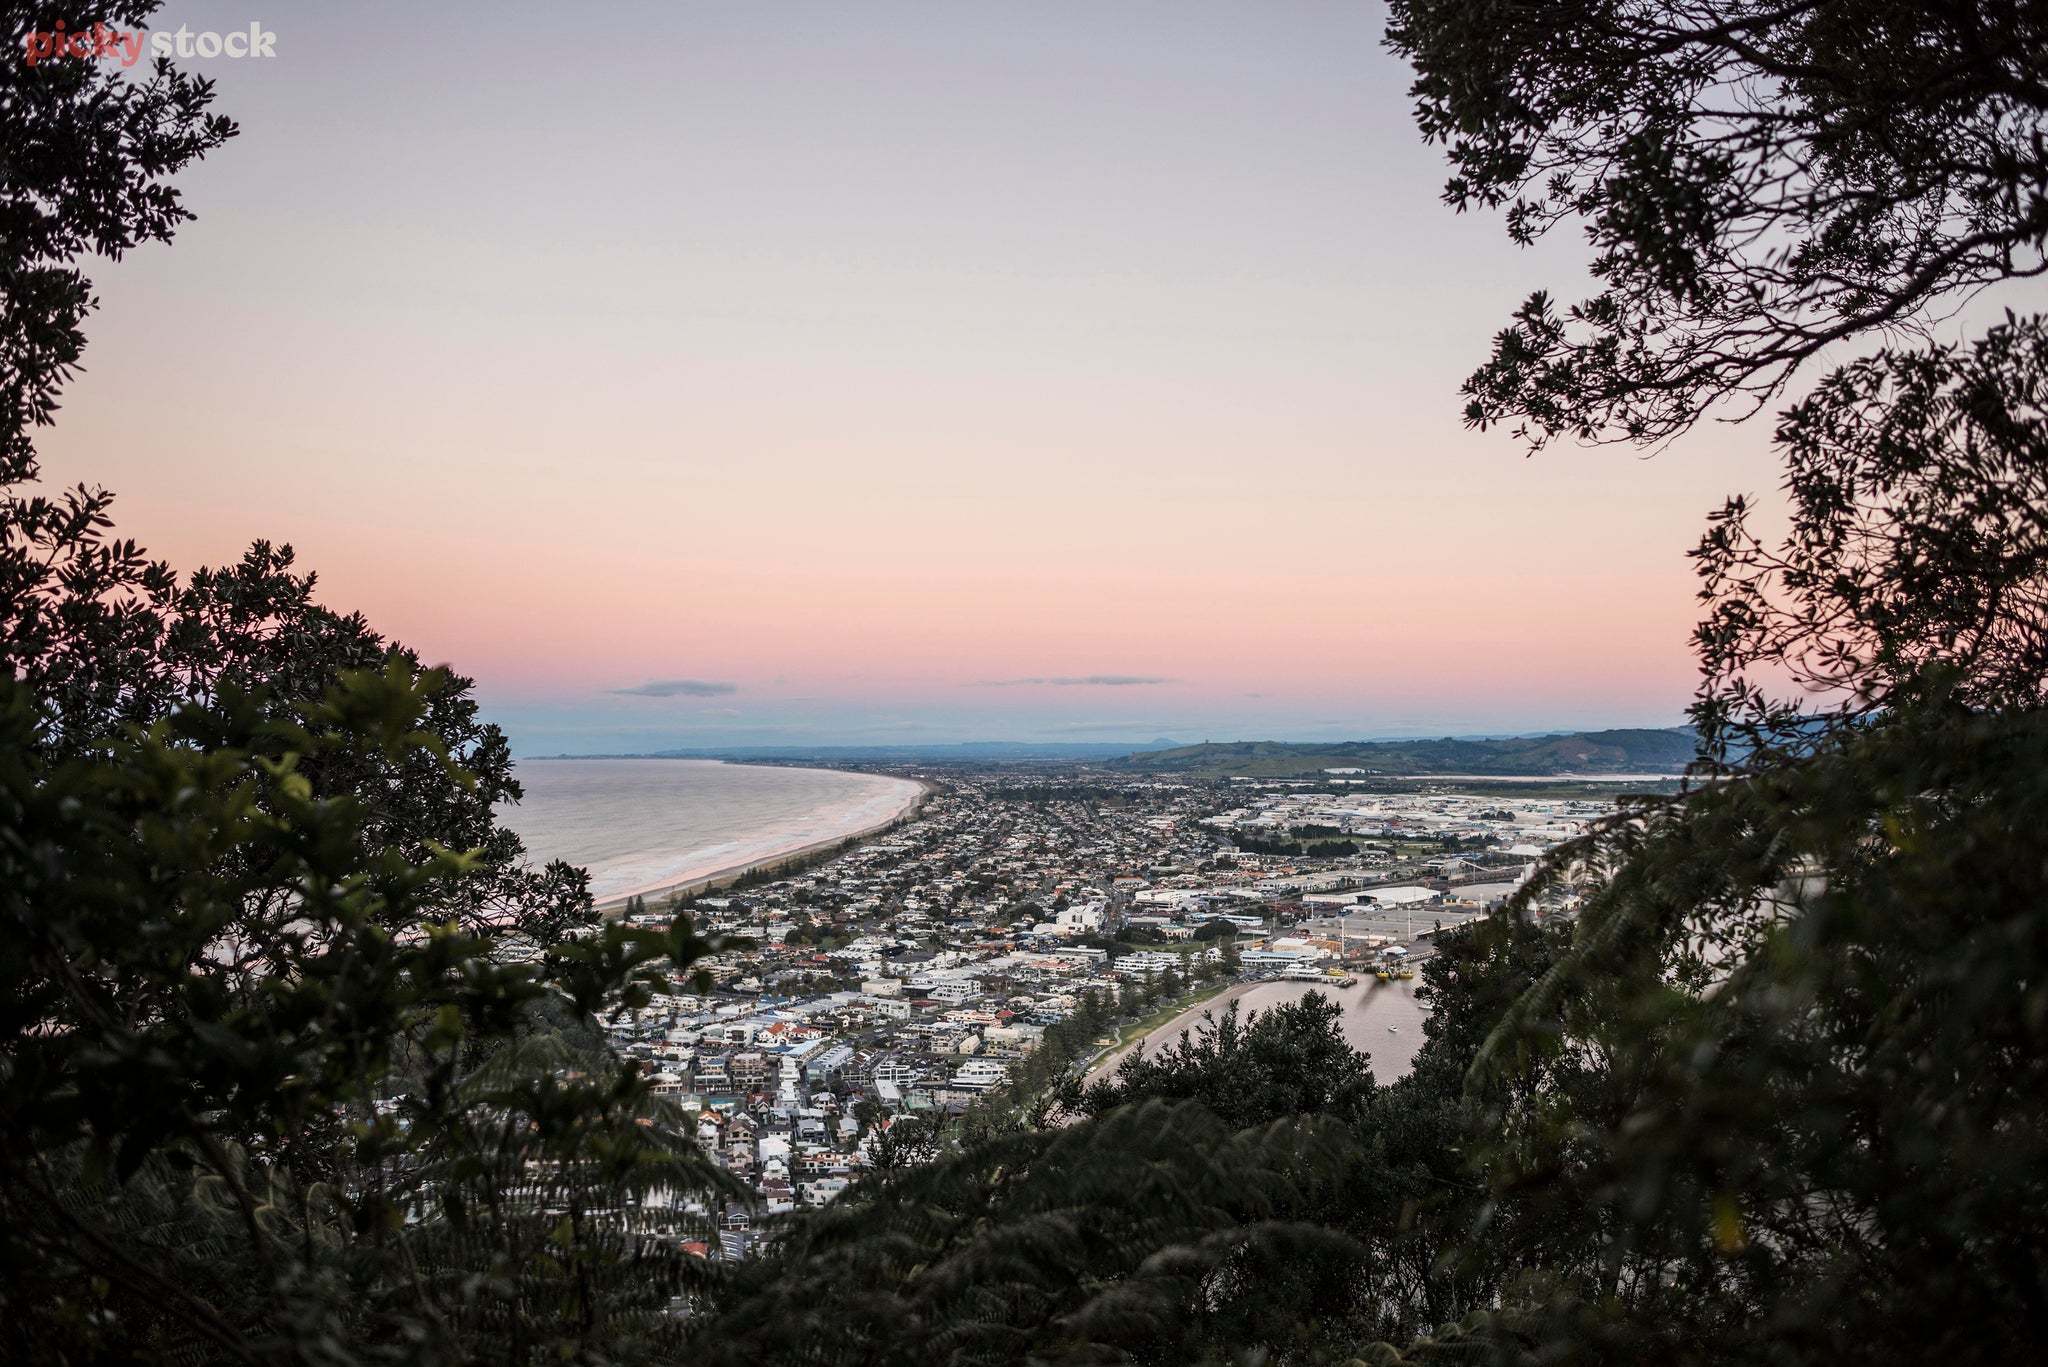 A view of the Mount in Tauranga New Zealand at night, the pink sky hangs above the town built on a beach and next to a port.